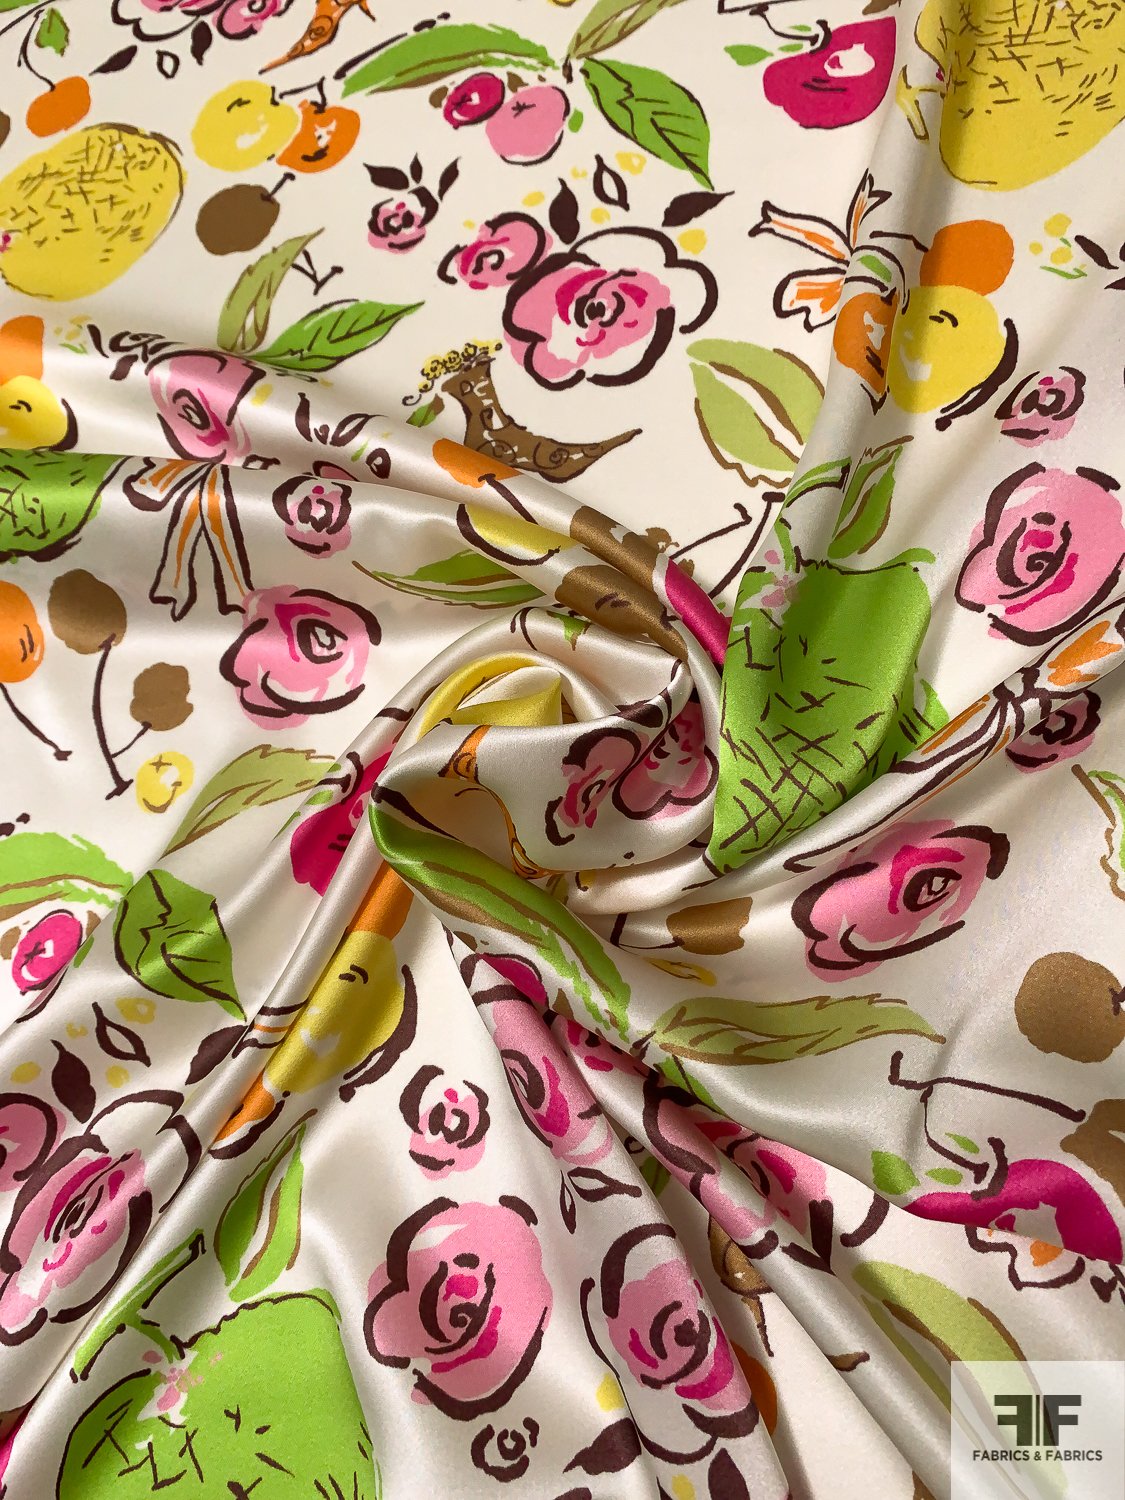 Fruity Watercolor Floral Printed Silk Charmeuse - Lime Green / Orange / Pink / Browns